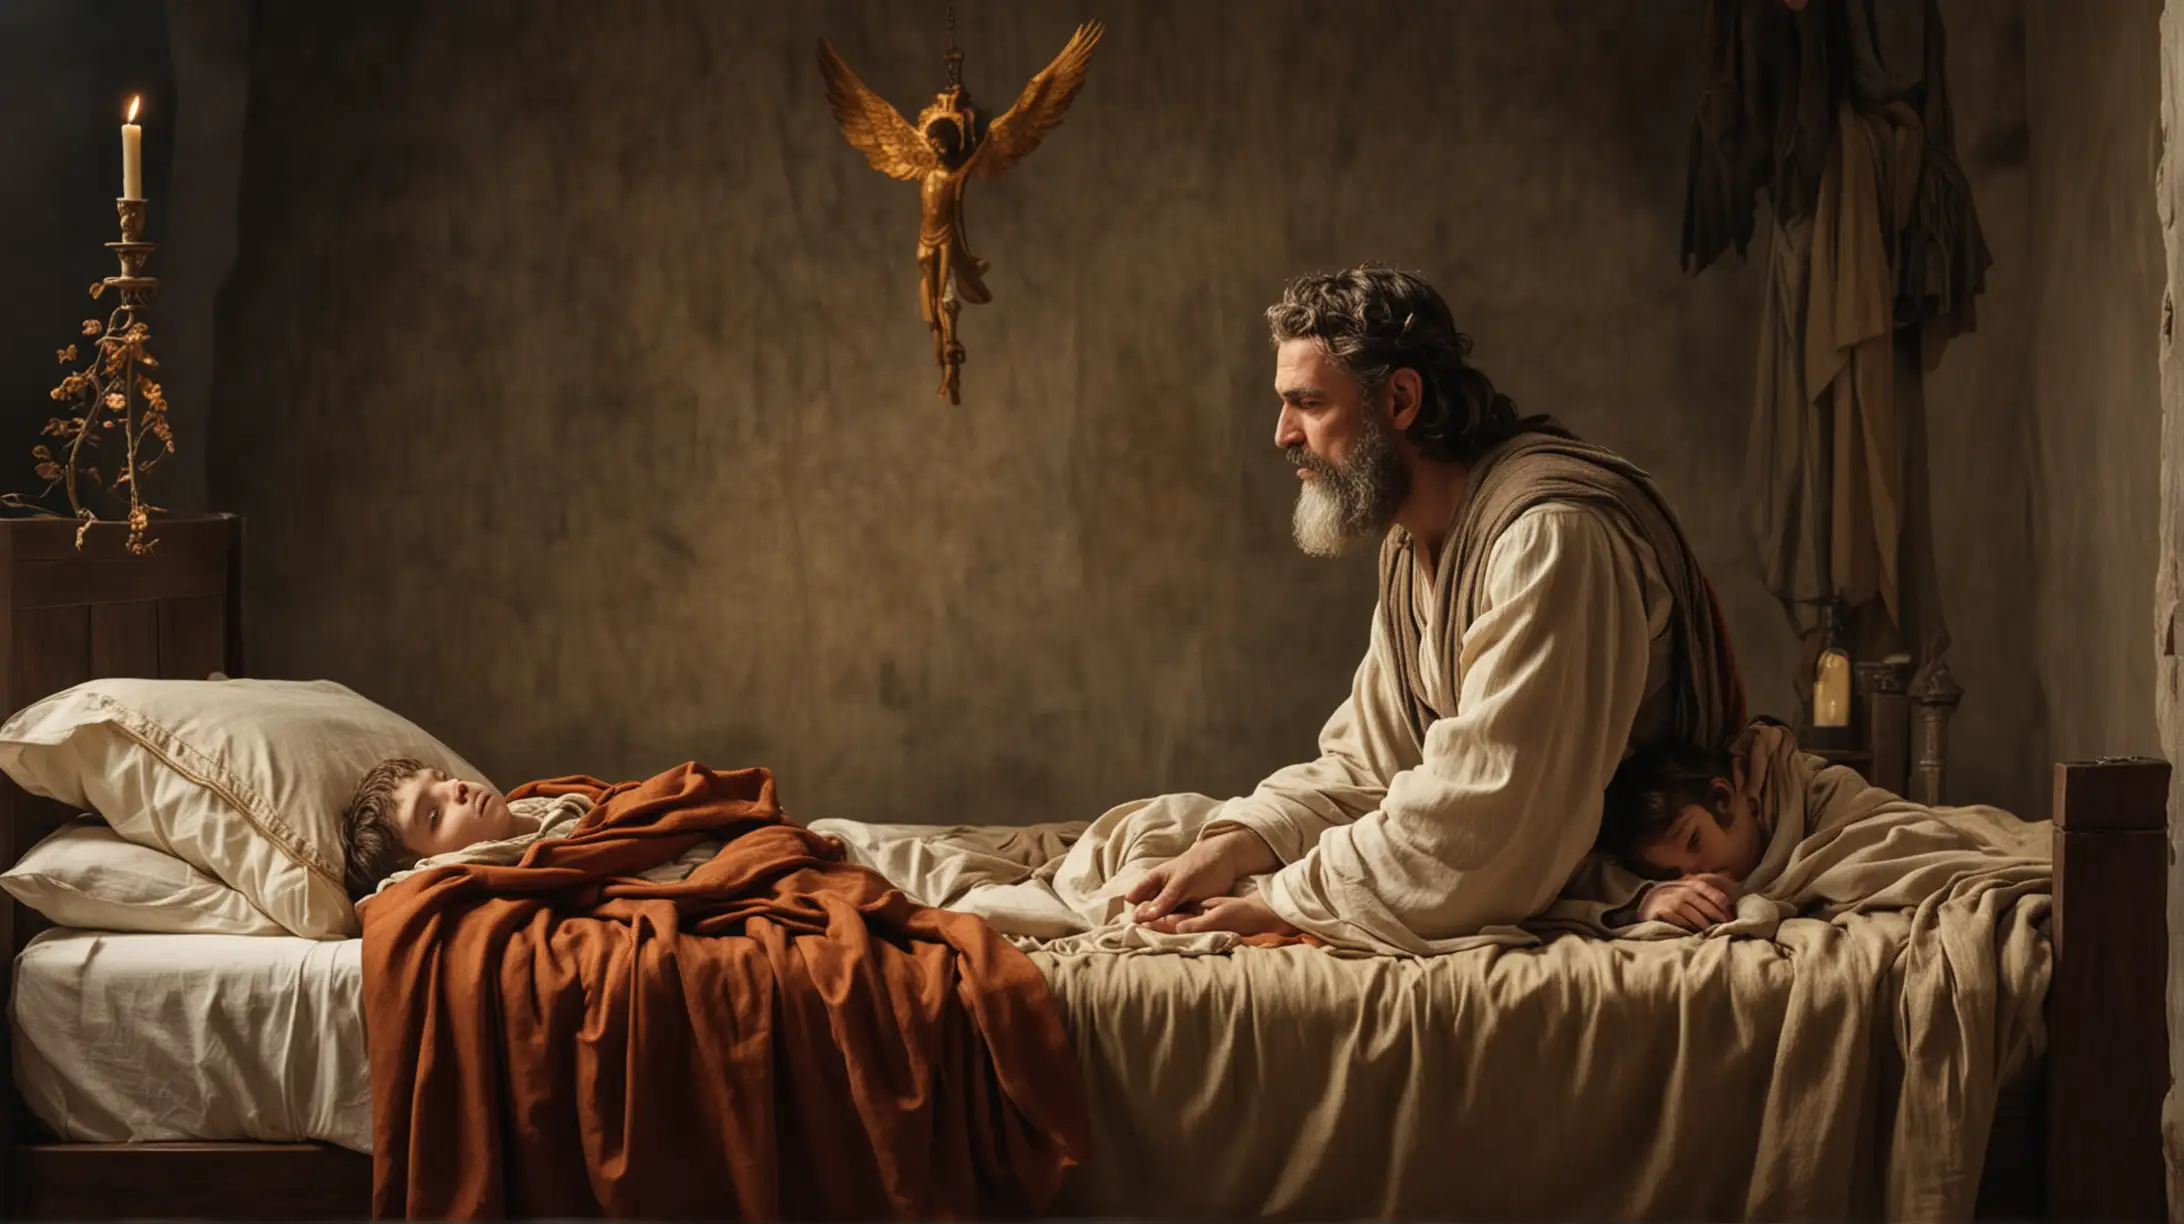 a scene of the Biblical Prophet Elijah where he prays over a sick boy who is lying down on a bed.